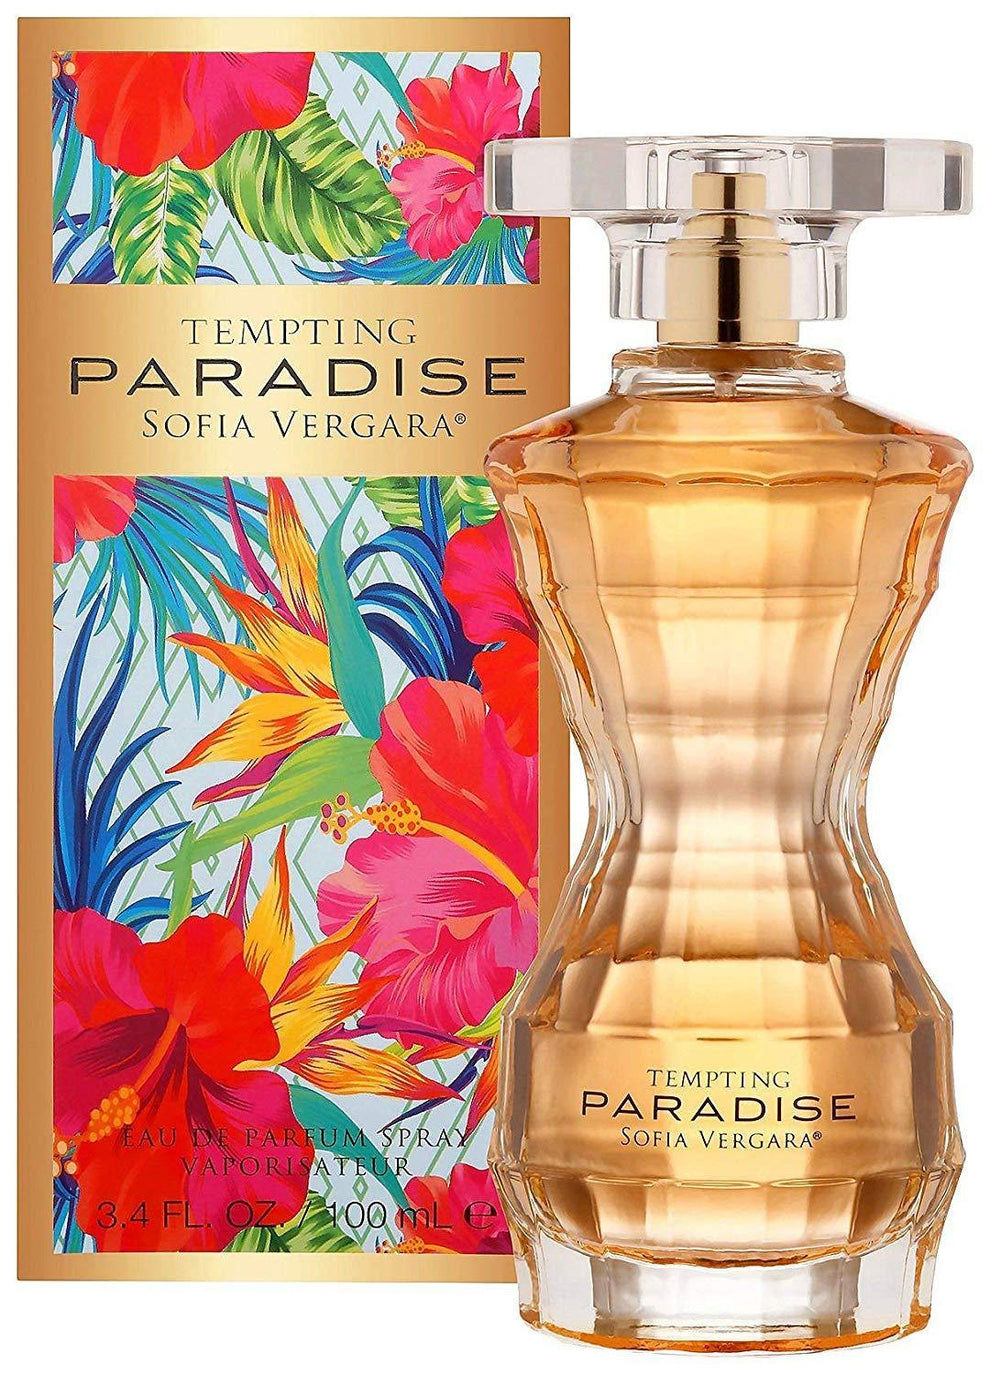 Tempting Paradise by Sofia Vergara for Women Product image 1